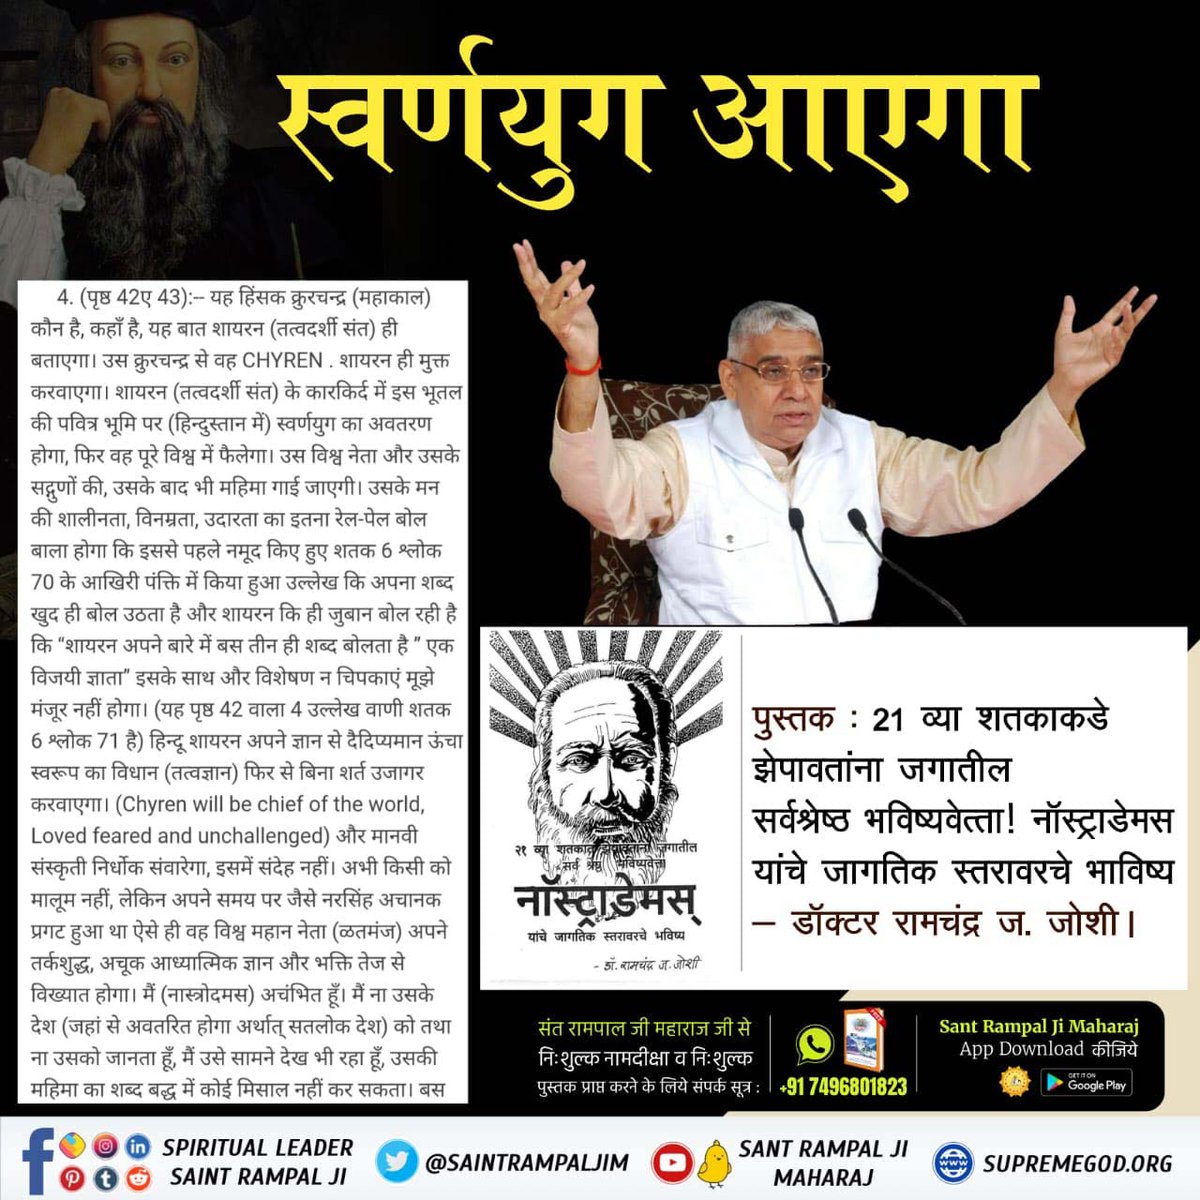 #आदि_सनातनधर्म_होगाप्रतिष्ठित
Restoration of Adi Sanatan Dharma

The conclusion of the predictions of all the famous prophets is that in the beginning of the 21st century a new religious revolution will emerge in the world whose leader will restore Adi Sanatan Dharma.